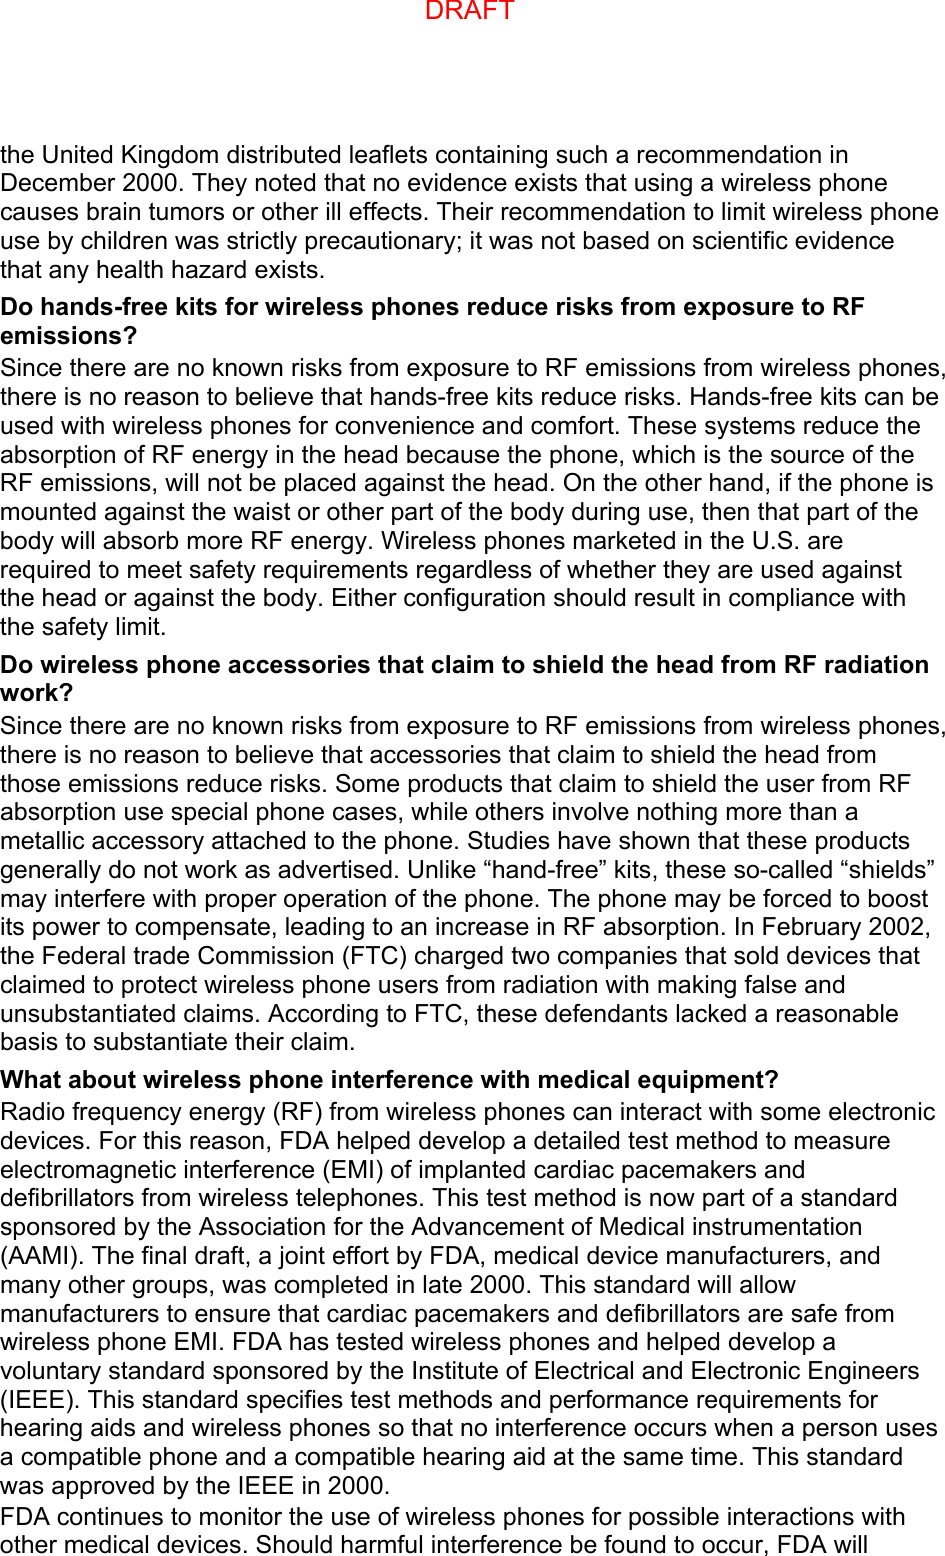 the United Kingdom distributed leaflets containing such a recommendation in December 2000. They noted that no evidence exists that using a wireless phone causes brain tumors or other ill effects. Their recommendation to limit wireless phone use by children was strictly precautionary; it was not based on scientific evidence that any health hazard exists.   Do hands-free kits for wireless phones reduce risks from exposure to RF emissions? Since there are no known risks from exposure to RF emissions from wireless phones, there is no reason to believe that hands-free kits reduce risks. Hands-free kits can be used with wireless phones for convenience and comfort. These systems reduce the absorption of RF energy in the head because the phone, which is the source of the RF emissions, will not be placed against the head. On the other hand, if the phone is mounted against the waist or other part of the body during use, then that part of the body will absorb more RF energy. Wireless phones marketed in the U.S. are required to meet safety requirements regardless of whether they are used against the head or against the body. Either configuration should result in compliance with the safety limit. Do wireless phone accessories that claim to shield the head from RF radiation work? Since there are no known risks from exposure to RF emissions from wireless phones, there is no reason to believe that accessories that claim to shield the head from those emissions reduce risks. Some products that claim to shield the user from RF absorption use special phone cases, while others involve nothing more than a metallic accessory attached to the phone. Studies have shown that these products generally do not work as advertised. Unlike “hand-free” kits, these so-called “shields” may interfere with proper operation of the phone. The phone may be forced to boost its power to compensate, leading to an increase in RF absorption. In February 2002, the Federal trade Commission (FTC) charged two companies that sold devices that claimed to protect wireless phone users from radiation with making false and unsubstantiated claims. According to FTC, these defendants lacked a reasonable basis to substantiate their claim. What about wireless phone interference with medical equipment? Radio frequency energy (RF) from wireless phones can interact with some electronic devices. For this reason, FDA helped develop a detailed test method to measure electromagnetic interference (EMI) of implanted cardiac pacemakers and defibrillators from wireless telephones. This test method is now part of a standard sponsored by the Association for the Advancement of Medical instrumentation (AAMI). The final draft, a joint effort by FDA, medical device manufacturers, and many other groups, was completed in late 2000. This standard will allow manufacturers to ensure that cardiac pacemakers and defibrillators are safe from wireless phone EMI. FDA has tested wireless phones and helped develop a voluntary standard sponsored by the Institute of Electrical and Electronic Engineers (IEEE). This standard specifies test methods and performance requirements for hearing aids and wireless phones so that no interference occurs when a person uses a compatible phone and a compatible hearing aid at the same time. This standard was approved by the IEEE in 2000. FDA continues to monitor the use of wireless phones for possible interactions with other medical devices. Should harmful interference be found to occur, FDA will DRAFT